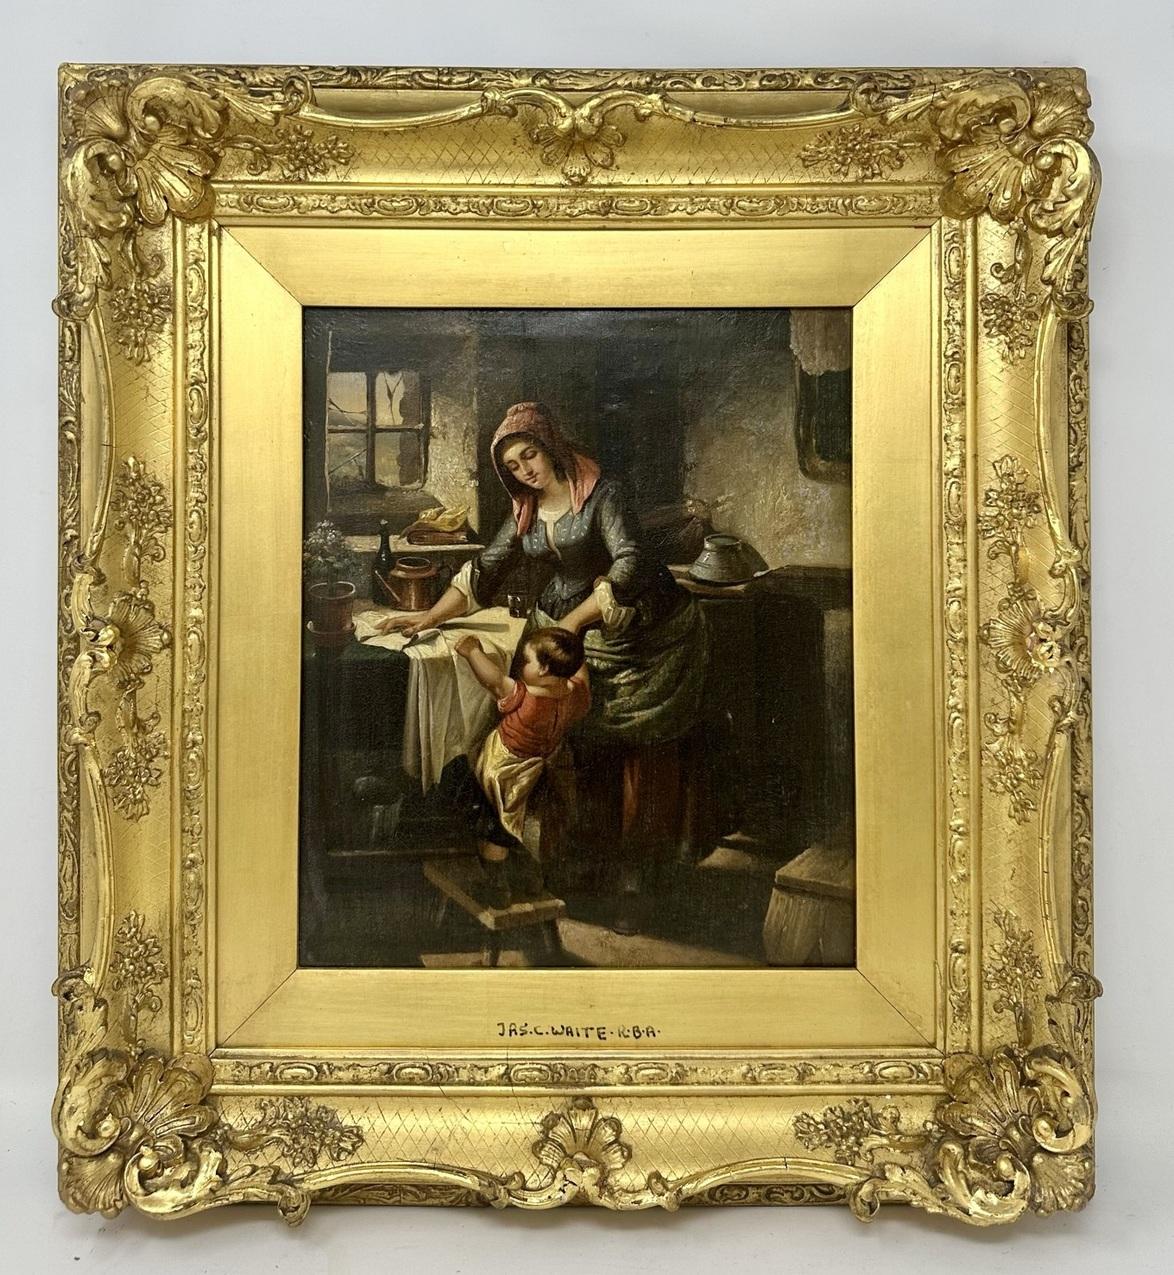 An exceptionally fine quality example of a framed Interior Kitchen Scene Oil Painting on Canvas by well documented English – Australian Artist James Clarke Waite, Third quarter of the Nineteenth Century. Complete with its original good very ornate